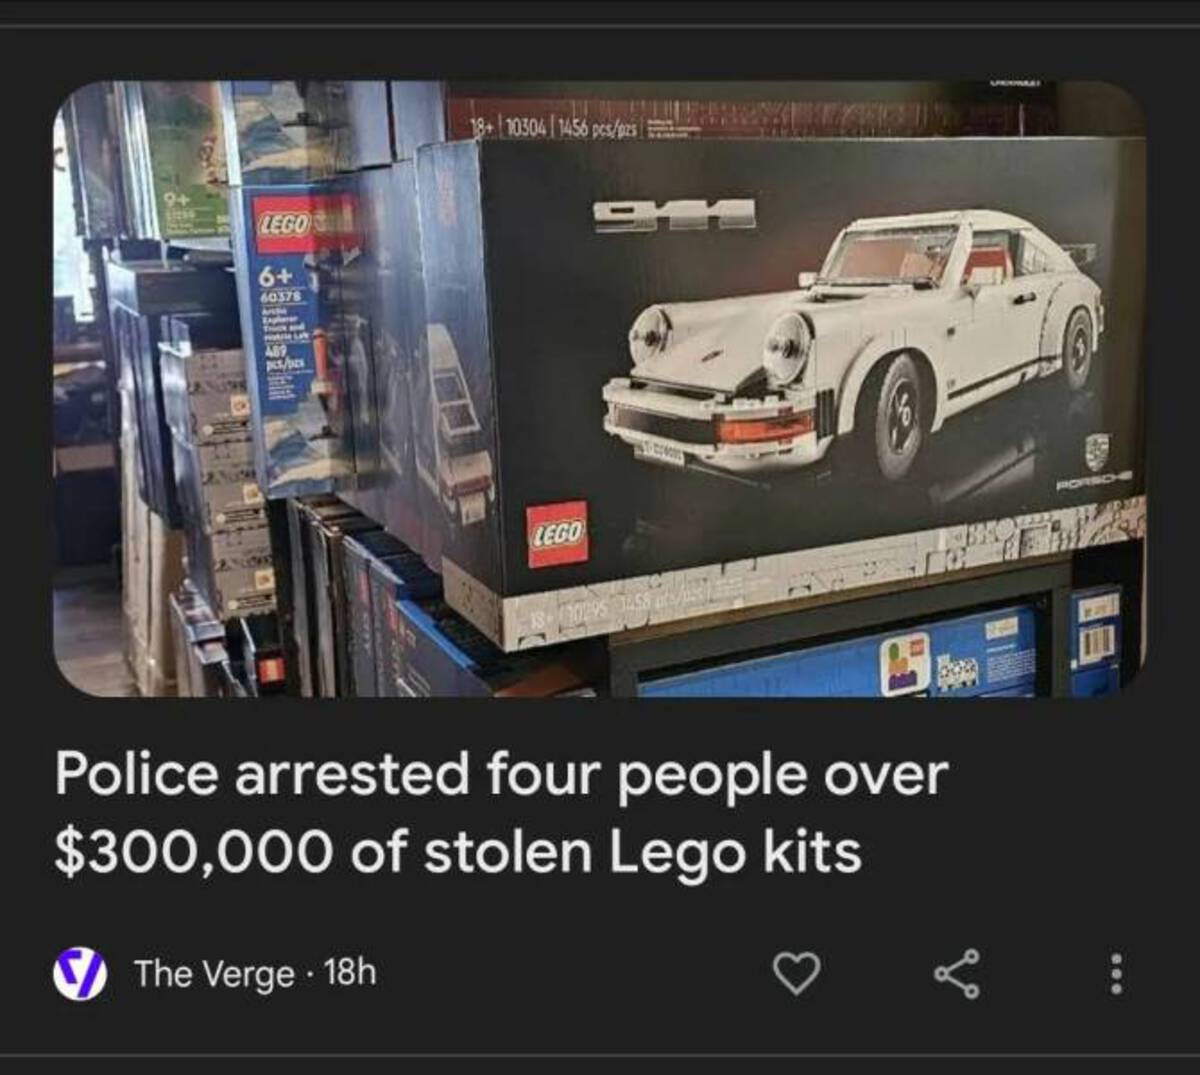 LEGO - 4 Lego 6 60378 489 pespes 18103041456 pcsps Lego 1890295 3258 Porsche Police arrested four people over $300,000 of stolen Lego kits The Verge 18h